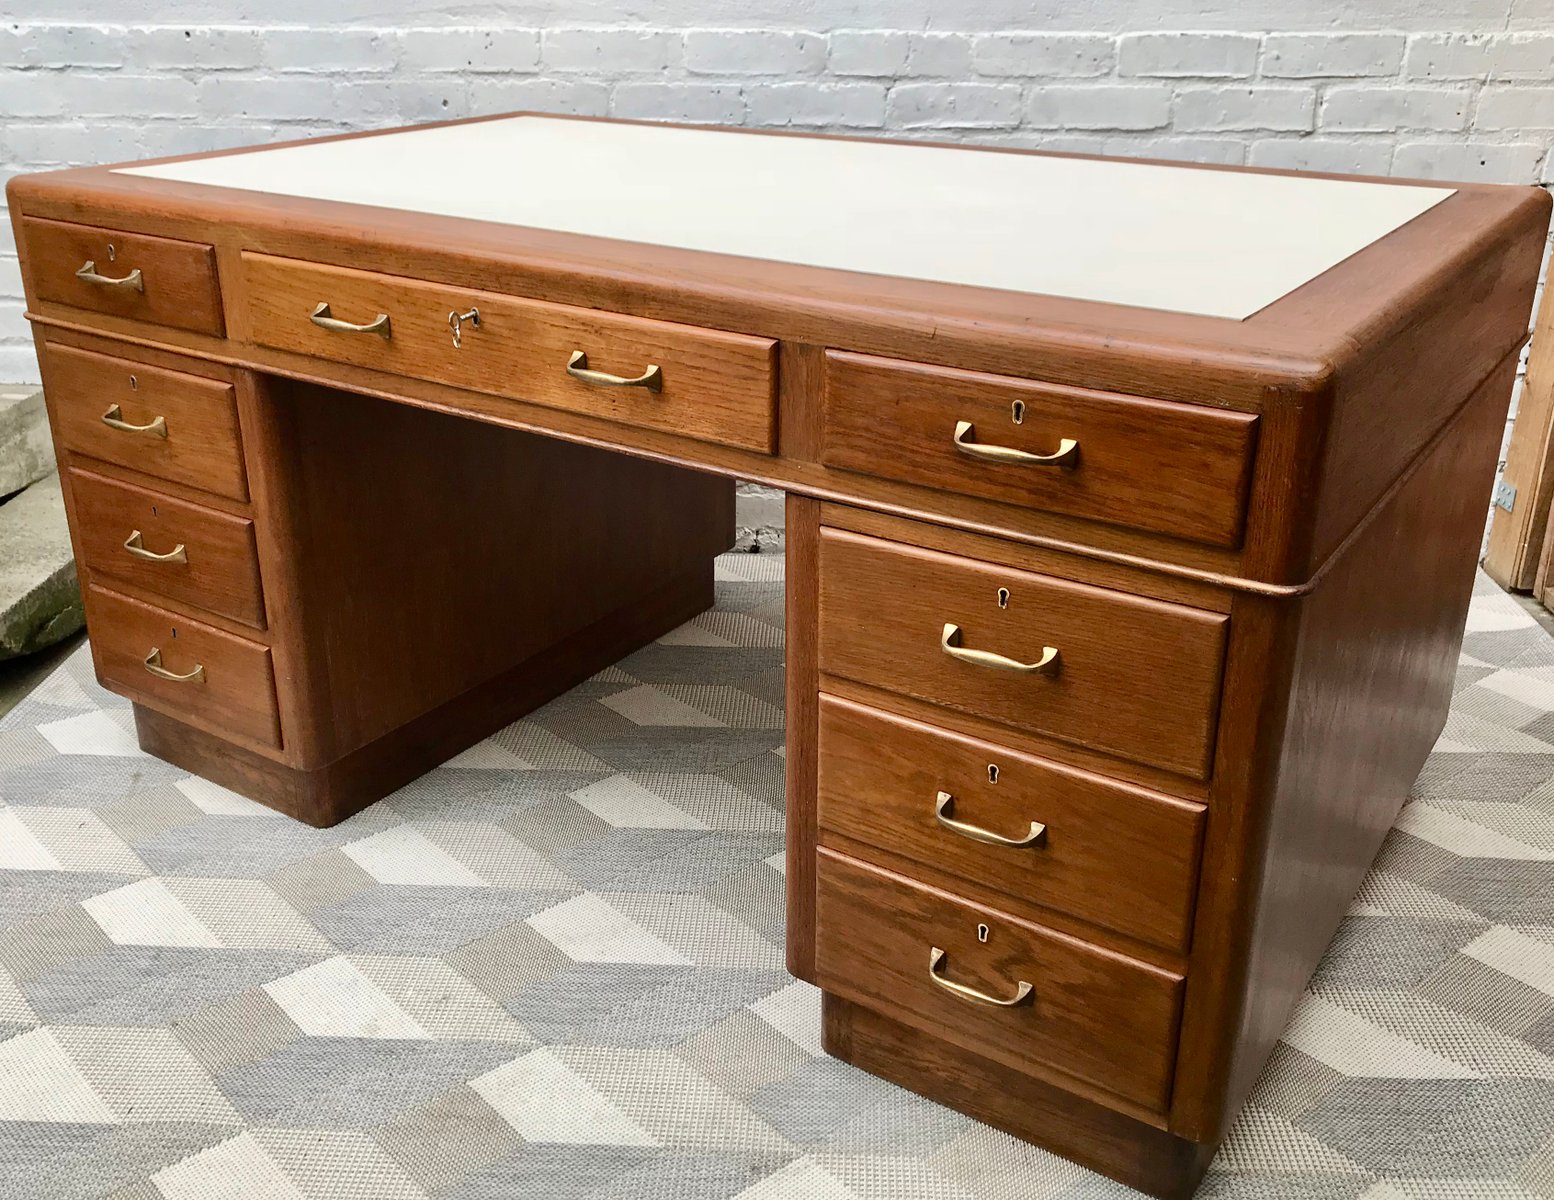 Large MidCentury Pedestal Desk with Drawers for sale at Pamono